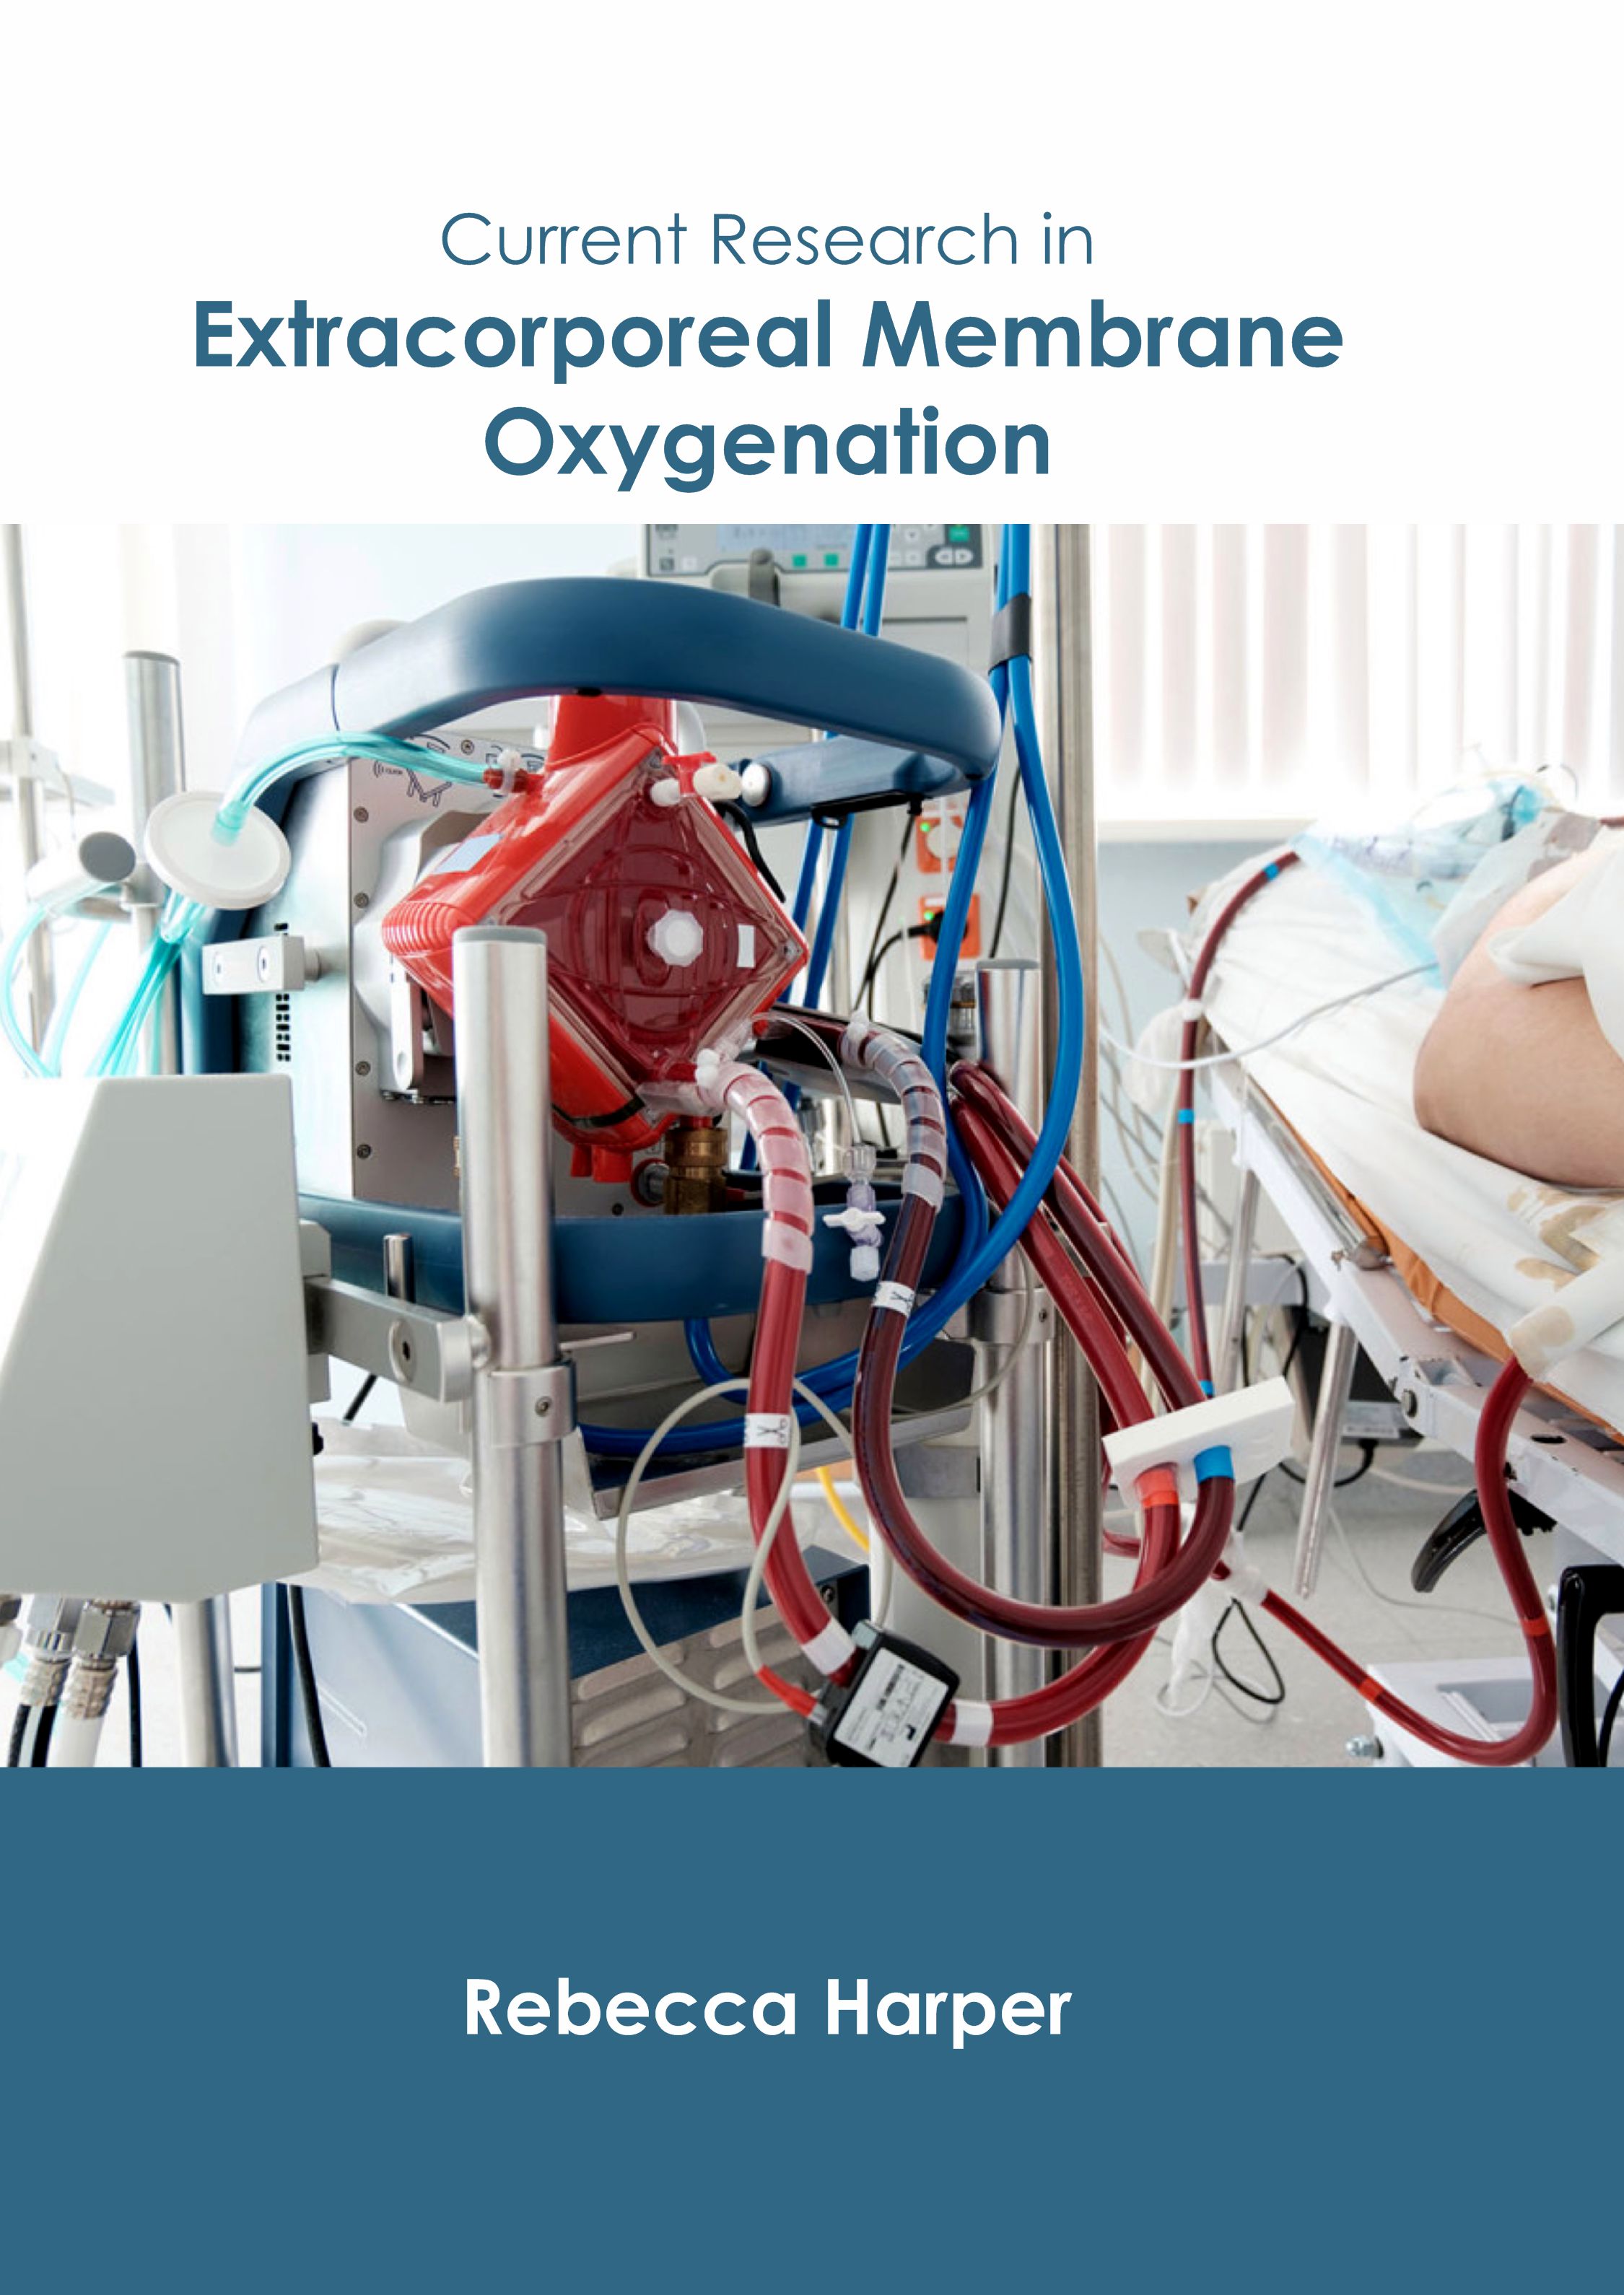 

exclusive-publishers/american-medical-publishers/current-research-in-extracorporeal-membrane-oxygenation-9781639270996